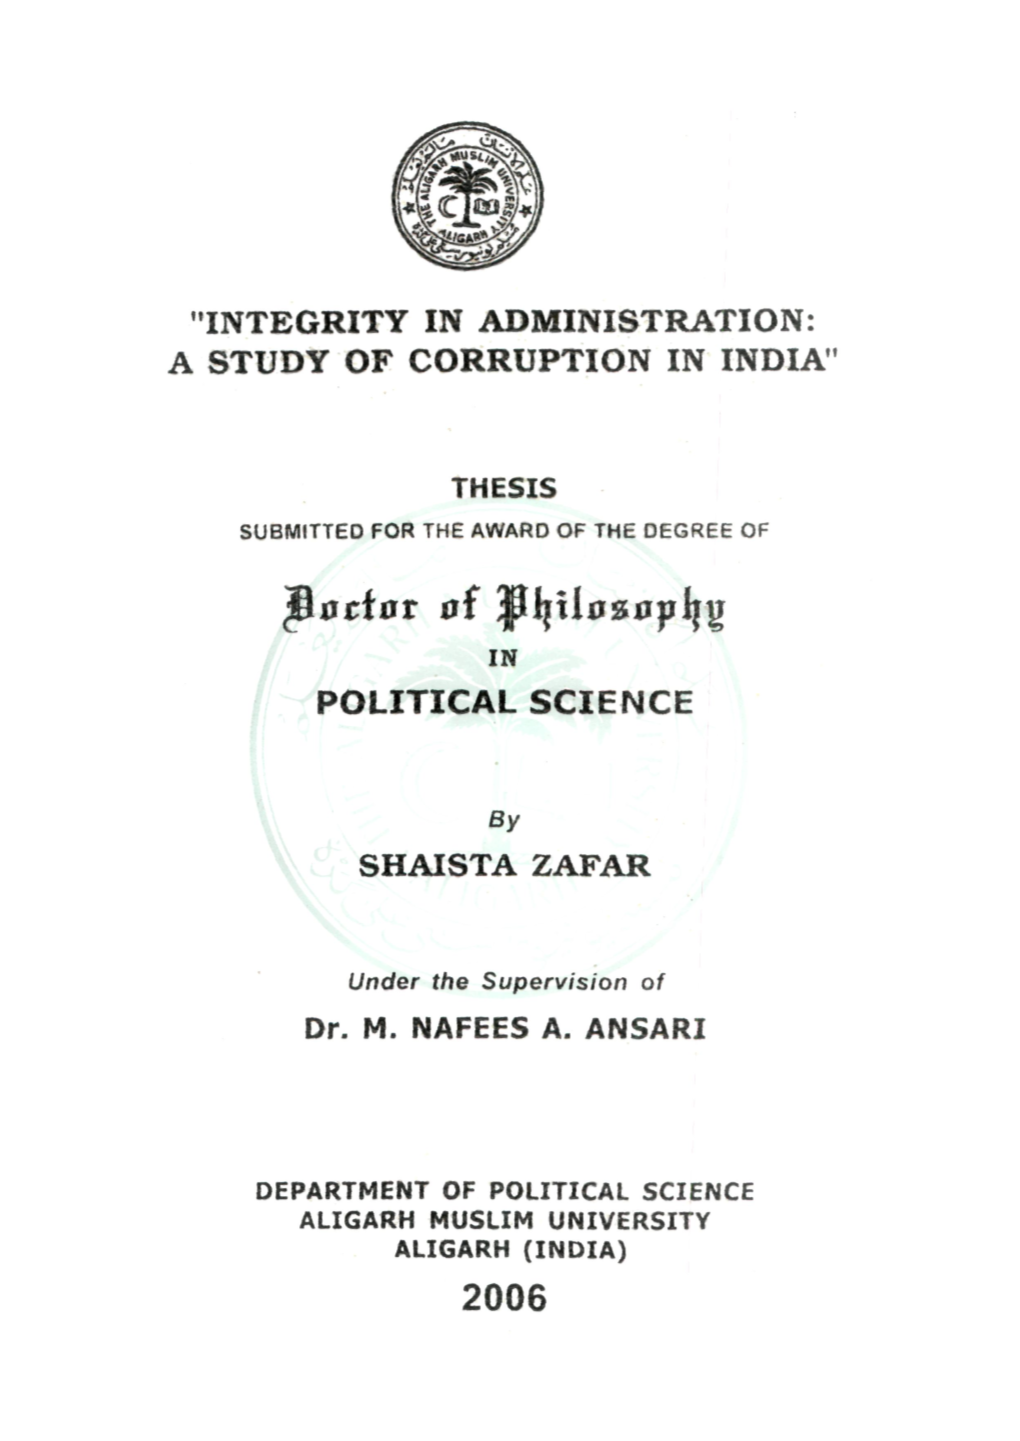 Integrity in Administration: a Study of Corruption in India"